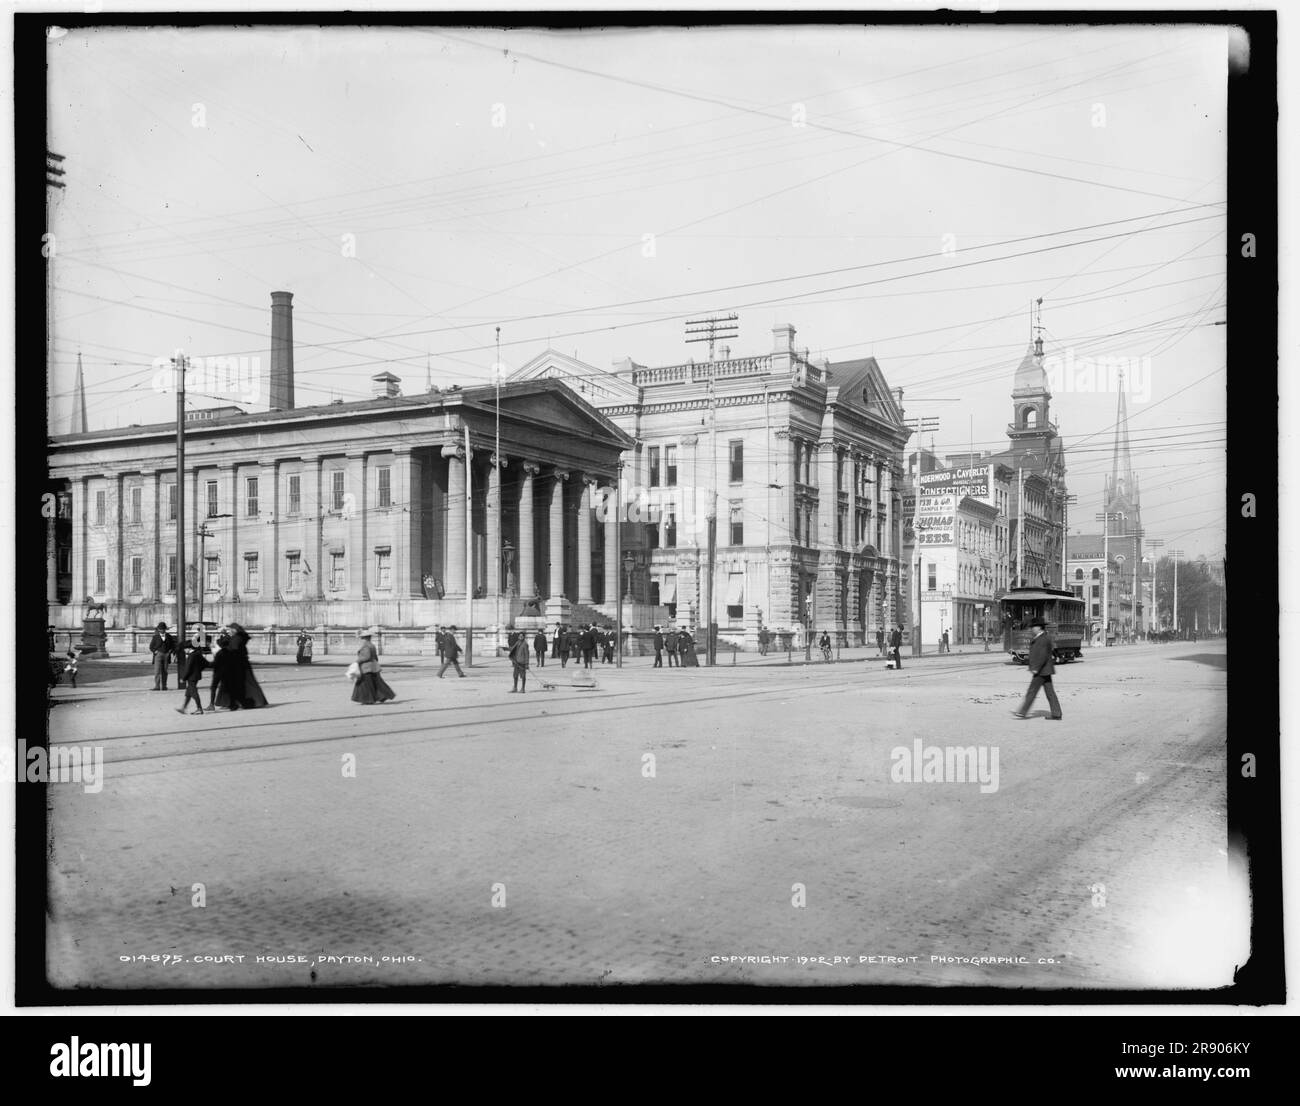 Court house, Dayton, Ohio, c1902. The Montgomery County Courthouse (on left) was designed in Greek Revival style by Howard Daniels and built in 1847. The limestone building, also known as the Old Courthouse, was modelled on the 5th century BC Temple of Hephaestus in Athens, Greece. In 1881-1884, a new, larger county courthouse was built beside the original building. The two were connected by a hallway, Stock Photo